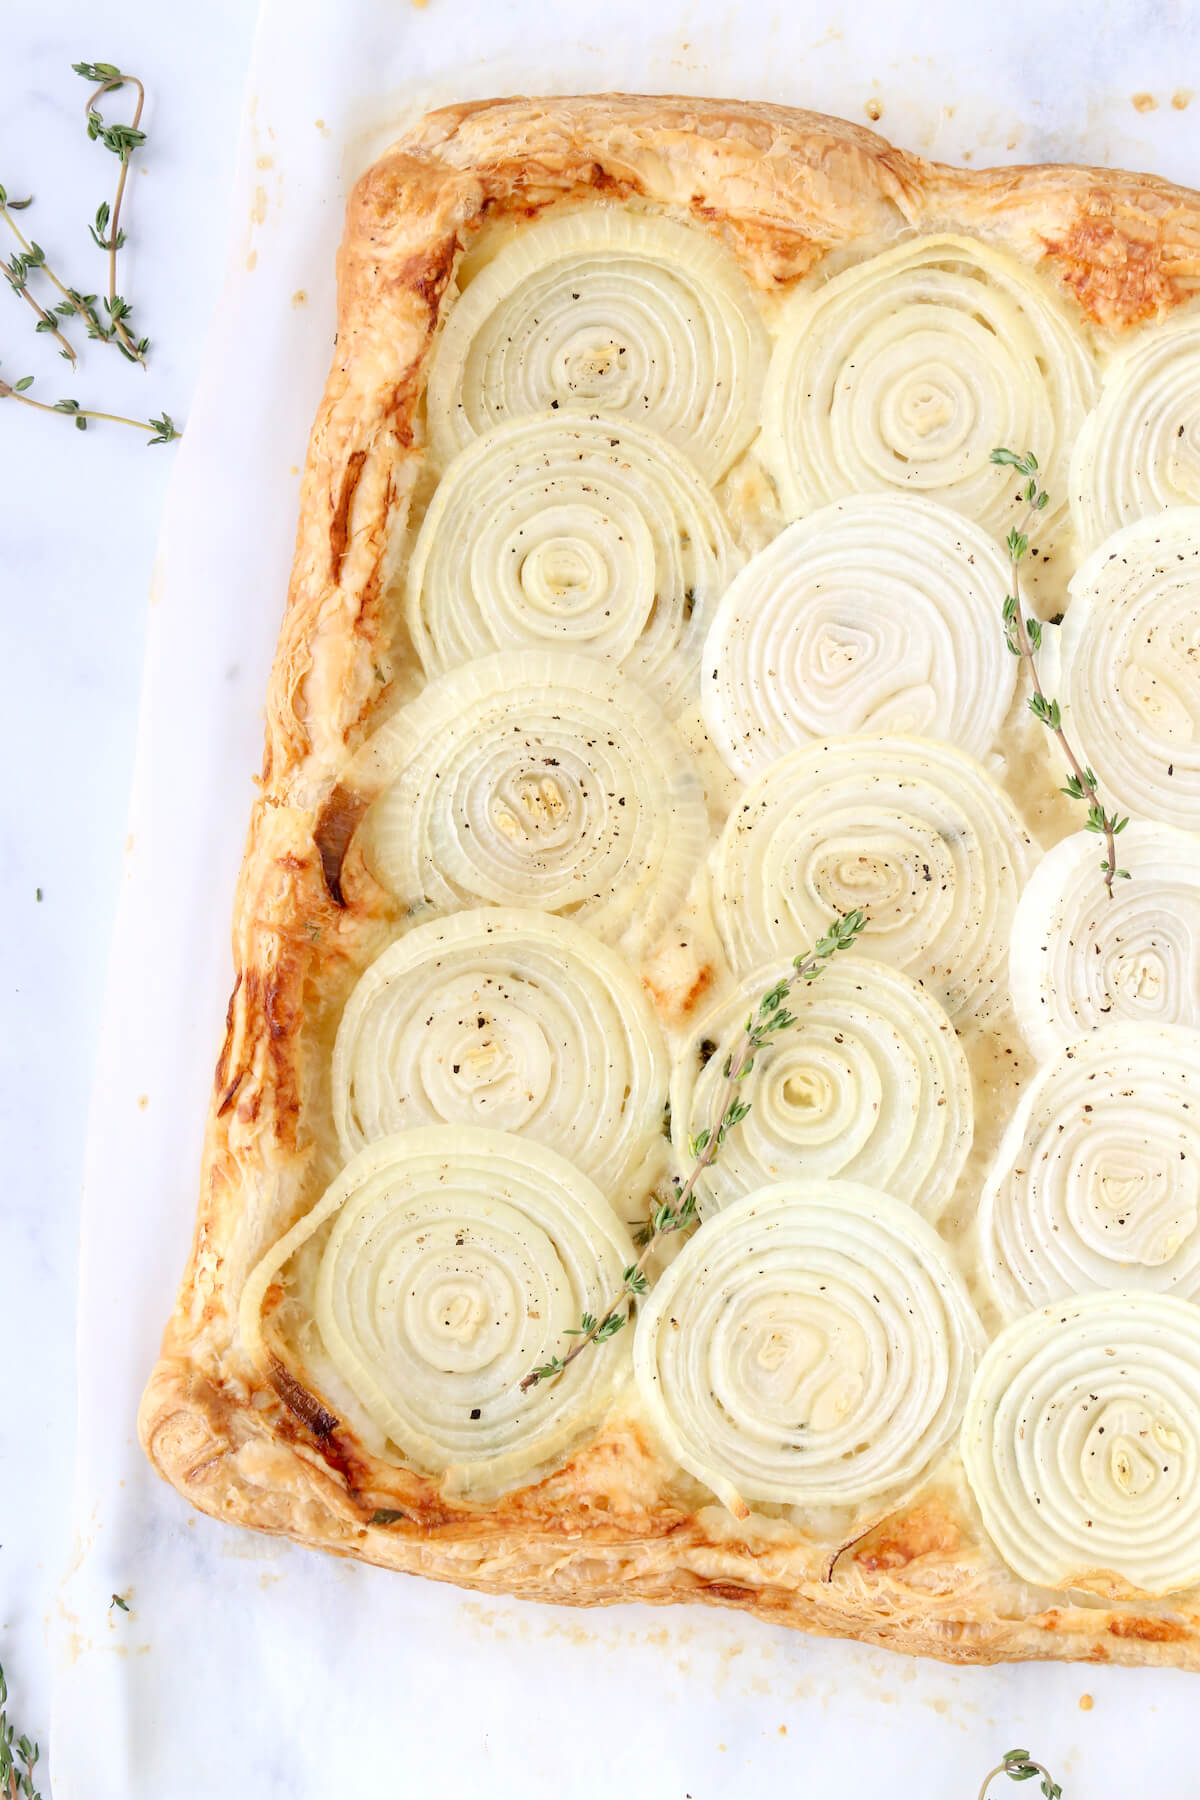 A puff pastry crust with sliced onions on top with fresh thyme leaves